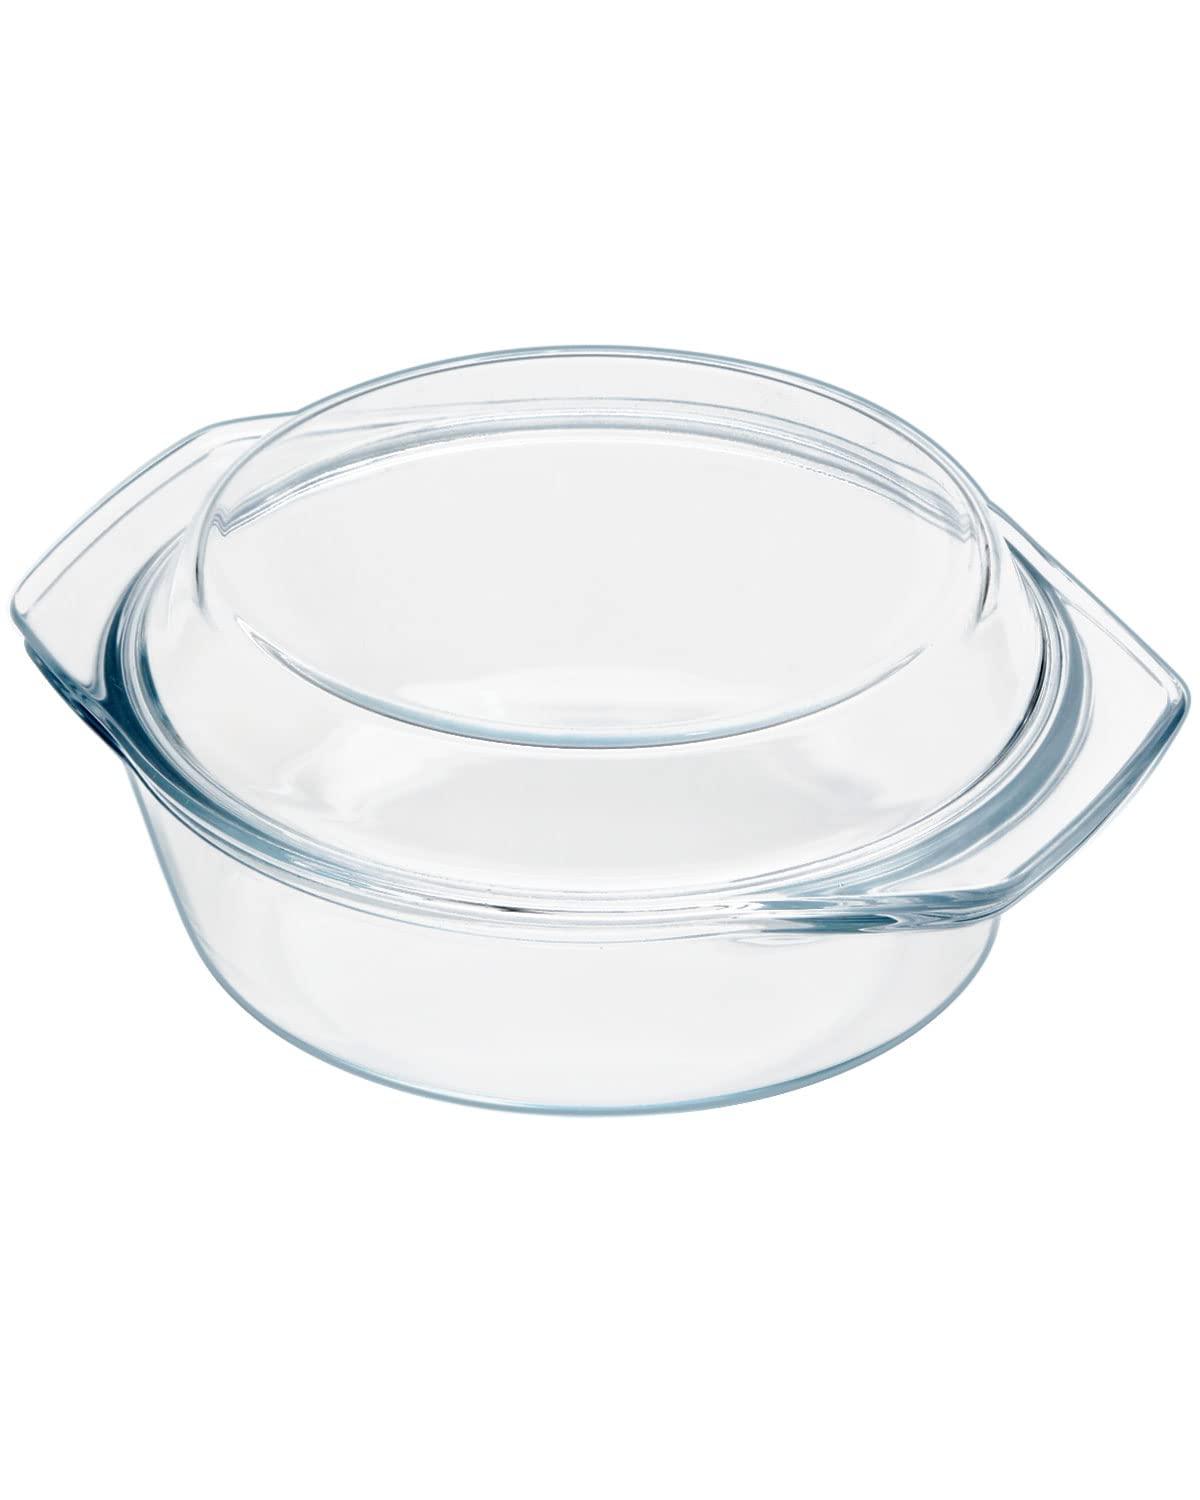 Clear Round Glass Casserole with Lid by NUTRIUPS | Covered Glass Ovenware with Lid, 1 L - CookCave